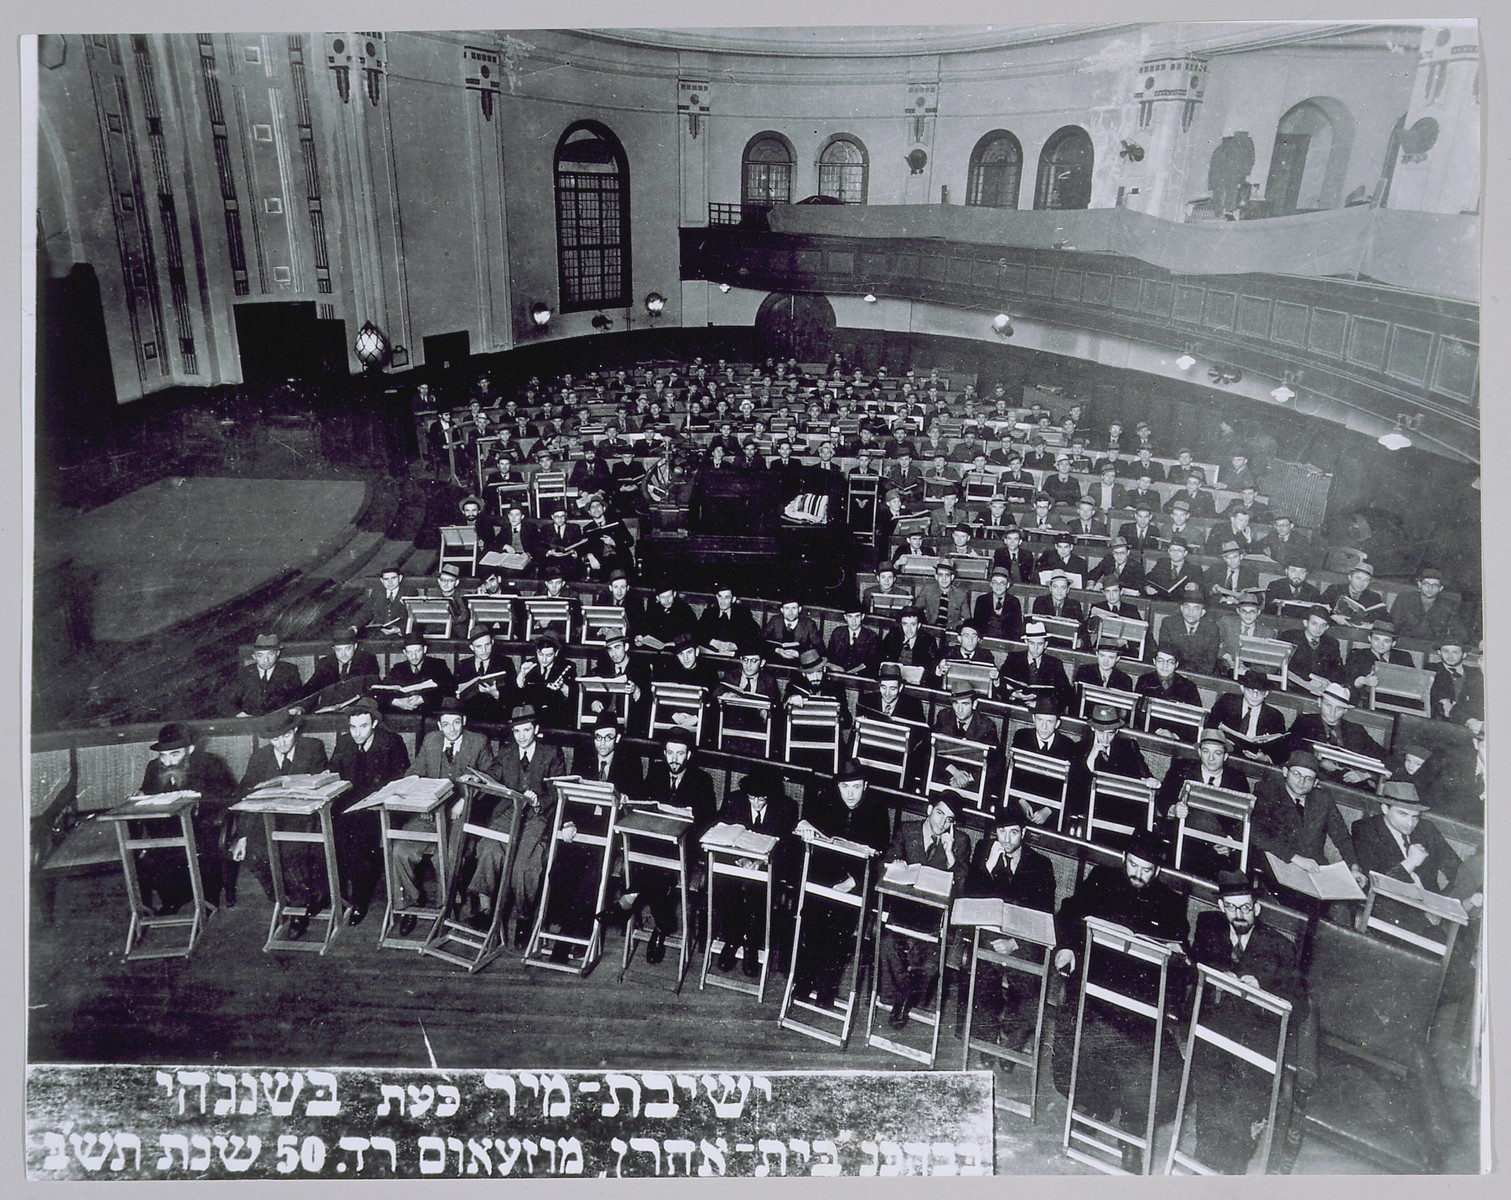 Students and teachers of the exiled Mir yeshiva study in the sanctuary of the Beth Aharon synagogue on Museum Road in Shanghai.

Among those pictured are: Rabbi Chezkel Lewensztejn (front row, first from the left); Rabbi Chaim L. Szmuelowicz, acting dean (front row, second from the right); and Rabbi J.D. Epstein, secretary (front row, first from the right).